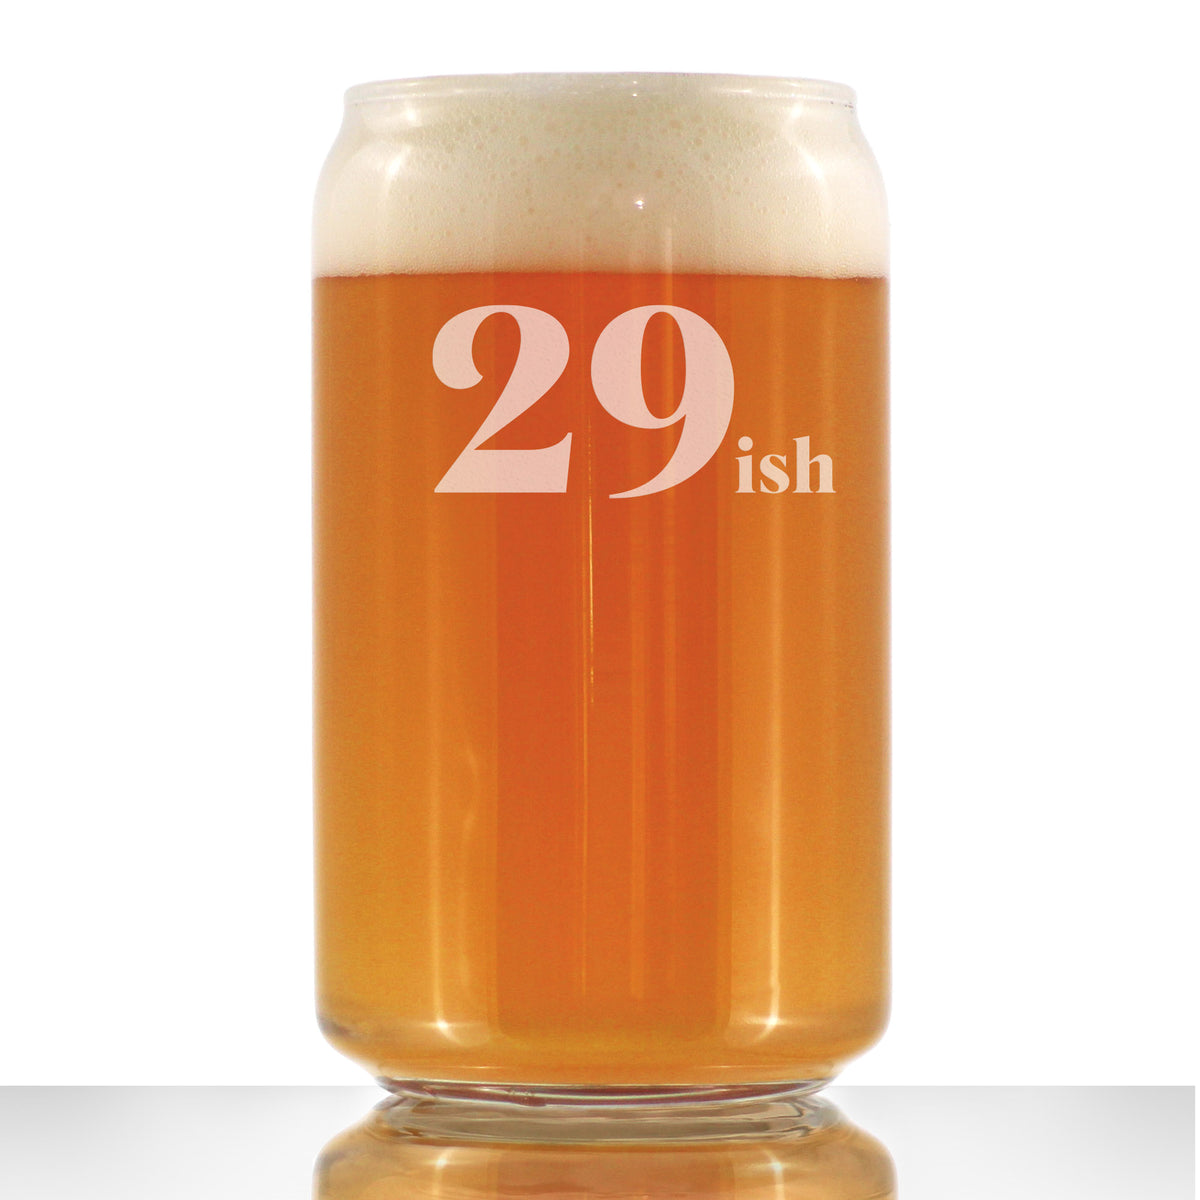 29ish - Funny 16 oz Beer Can Pint Glass - 30th Birthday Gifts for Men or Women Turning 30 - Fun Bday Decor